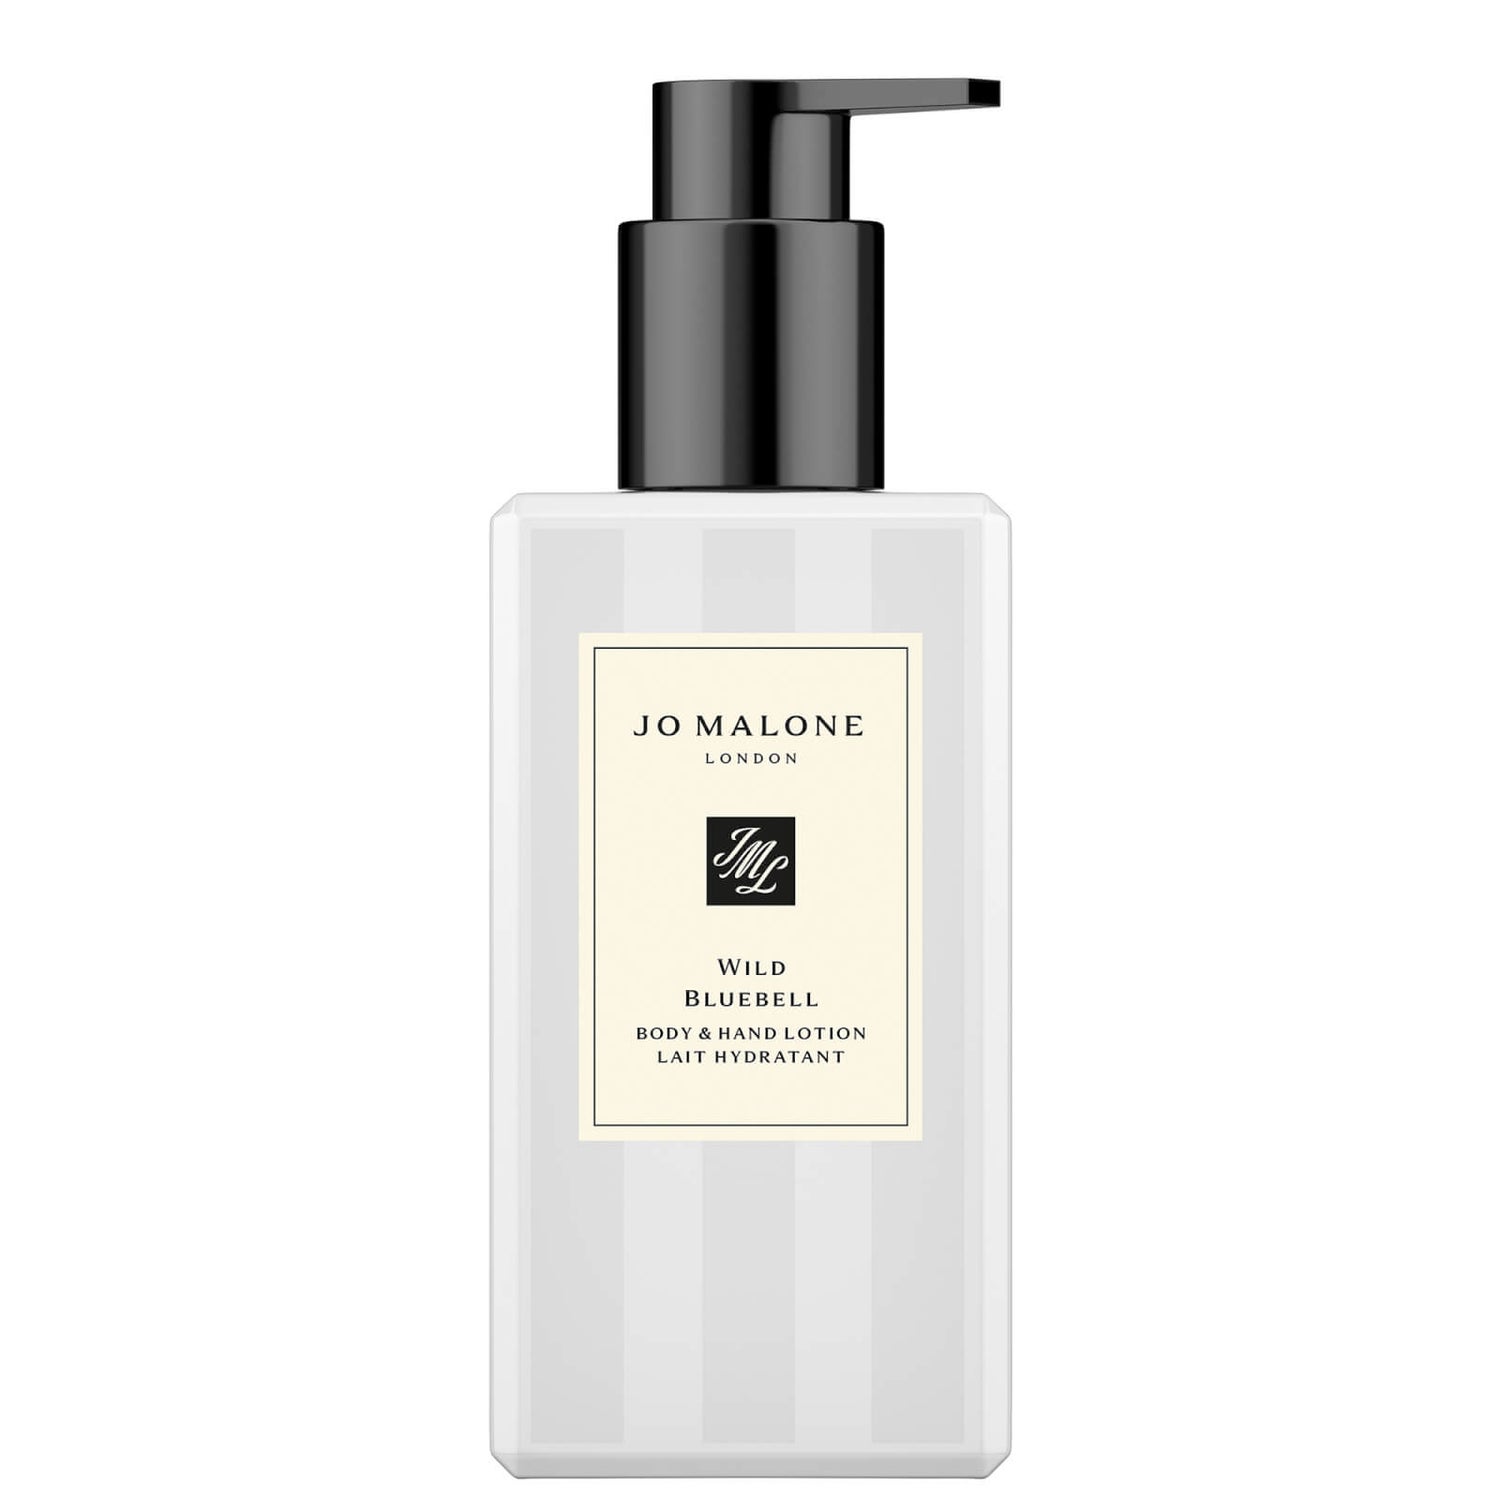 Jo Malone London Wild Bluebell Body and Hand Lotion 100ml